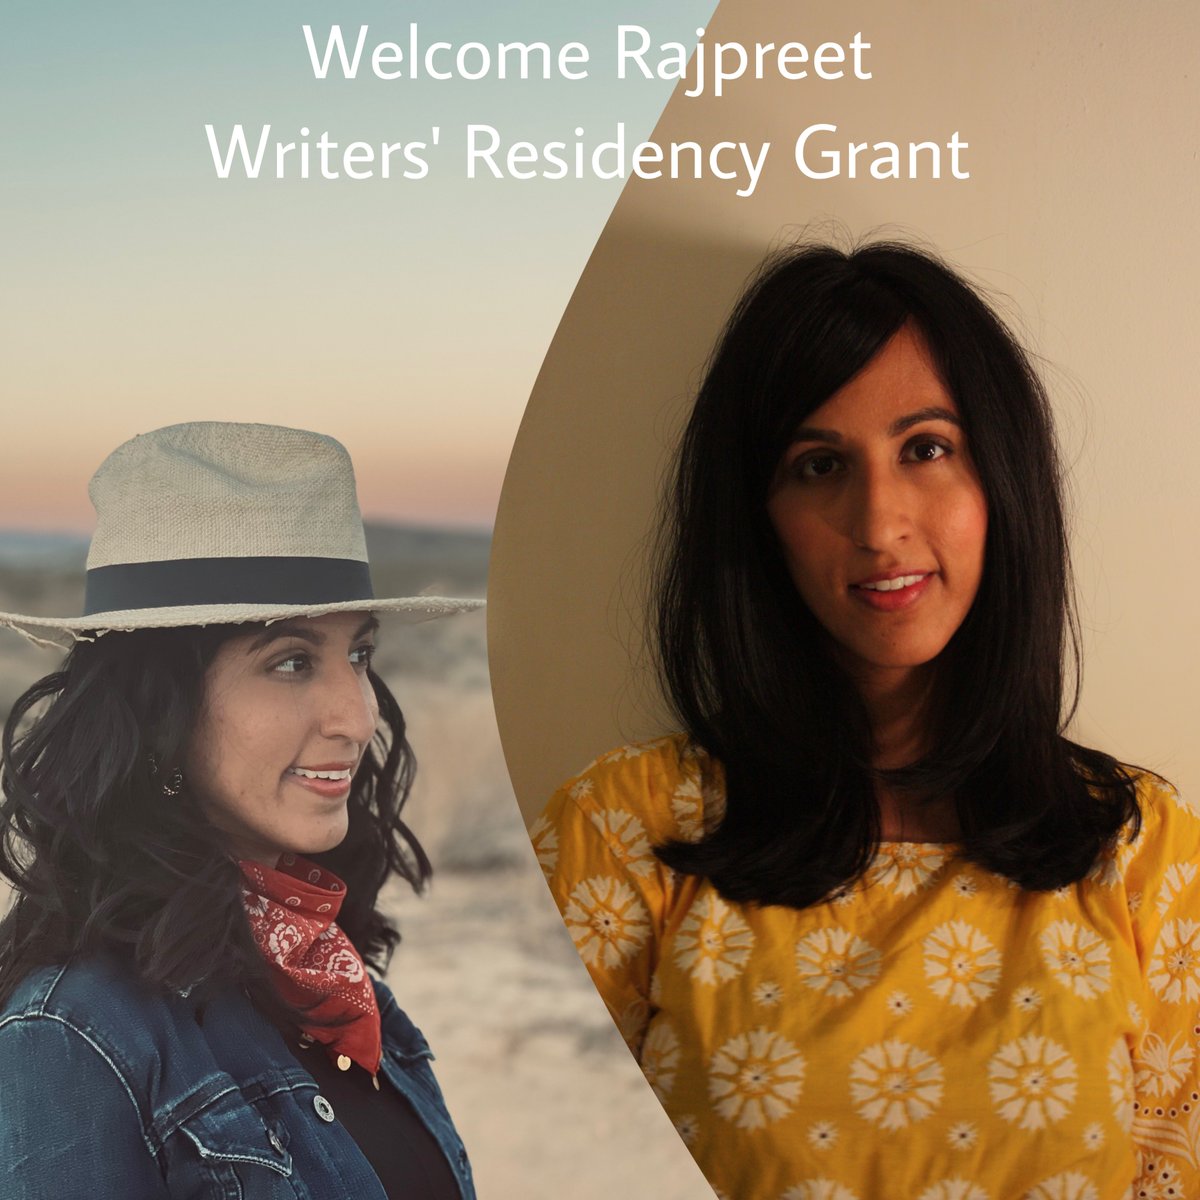 Announcing the recipient of our first-ever Writers' Residency Grant: congratulations to @rajtweet_edu, an Ithaca College professor who's writing a memoir. She'll receive a no-cost, three-month flex desk membership at 42west24. Thank you to all who applied!